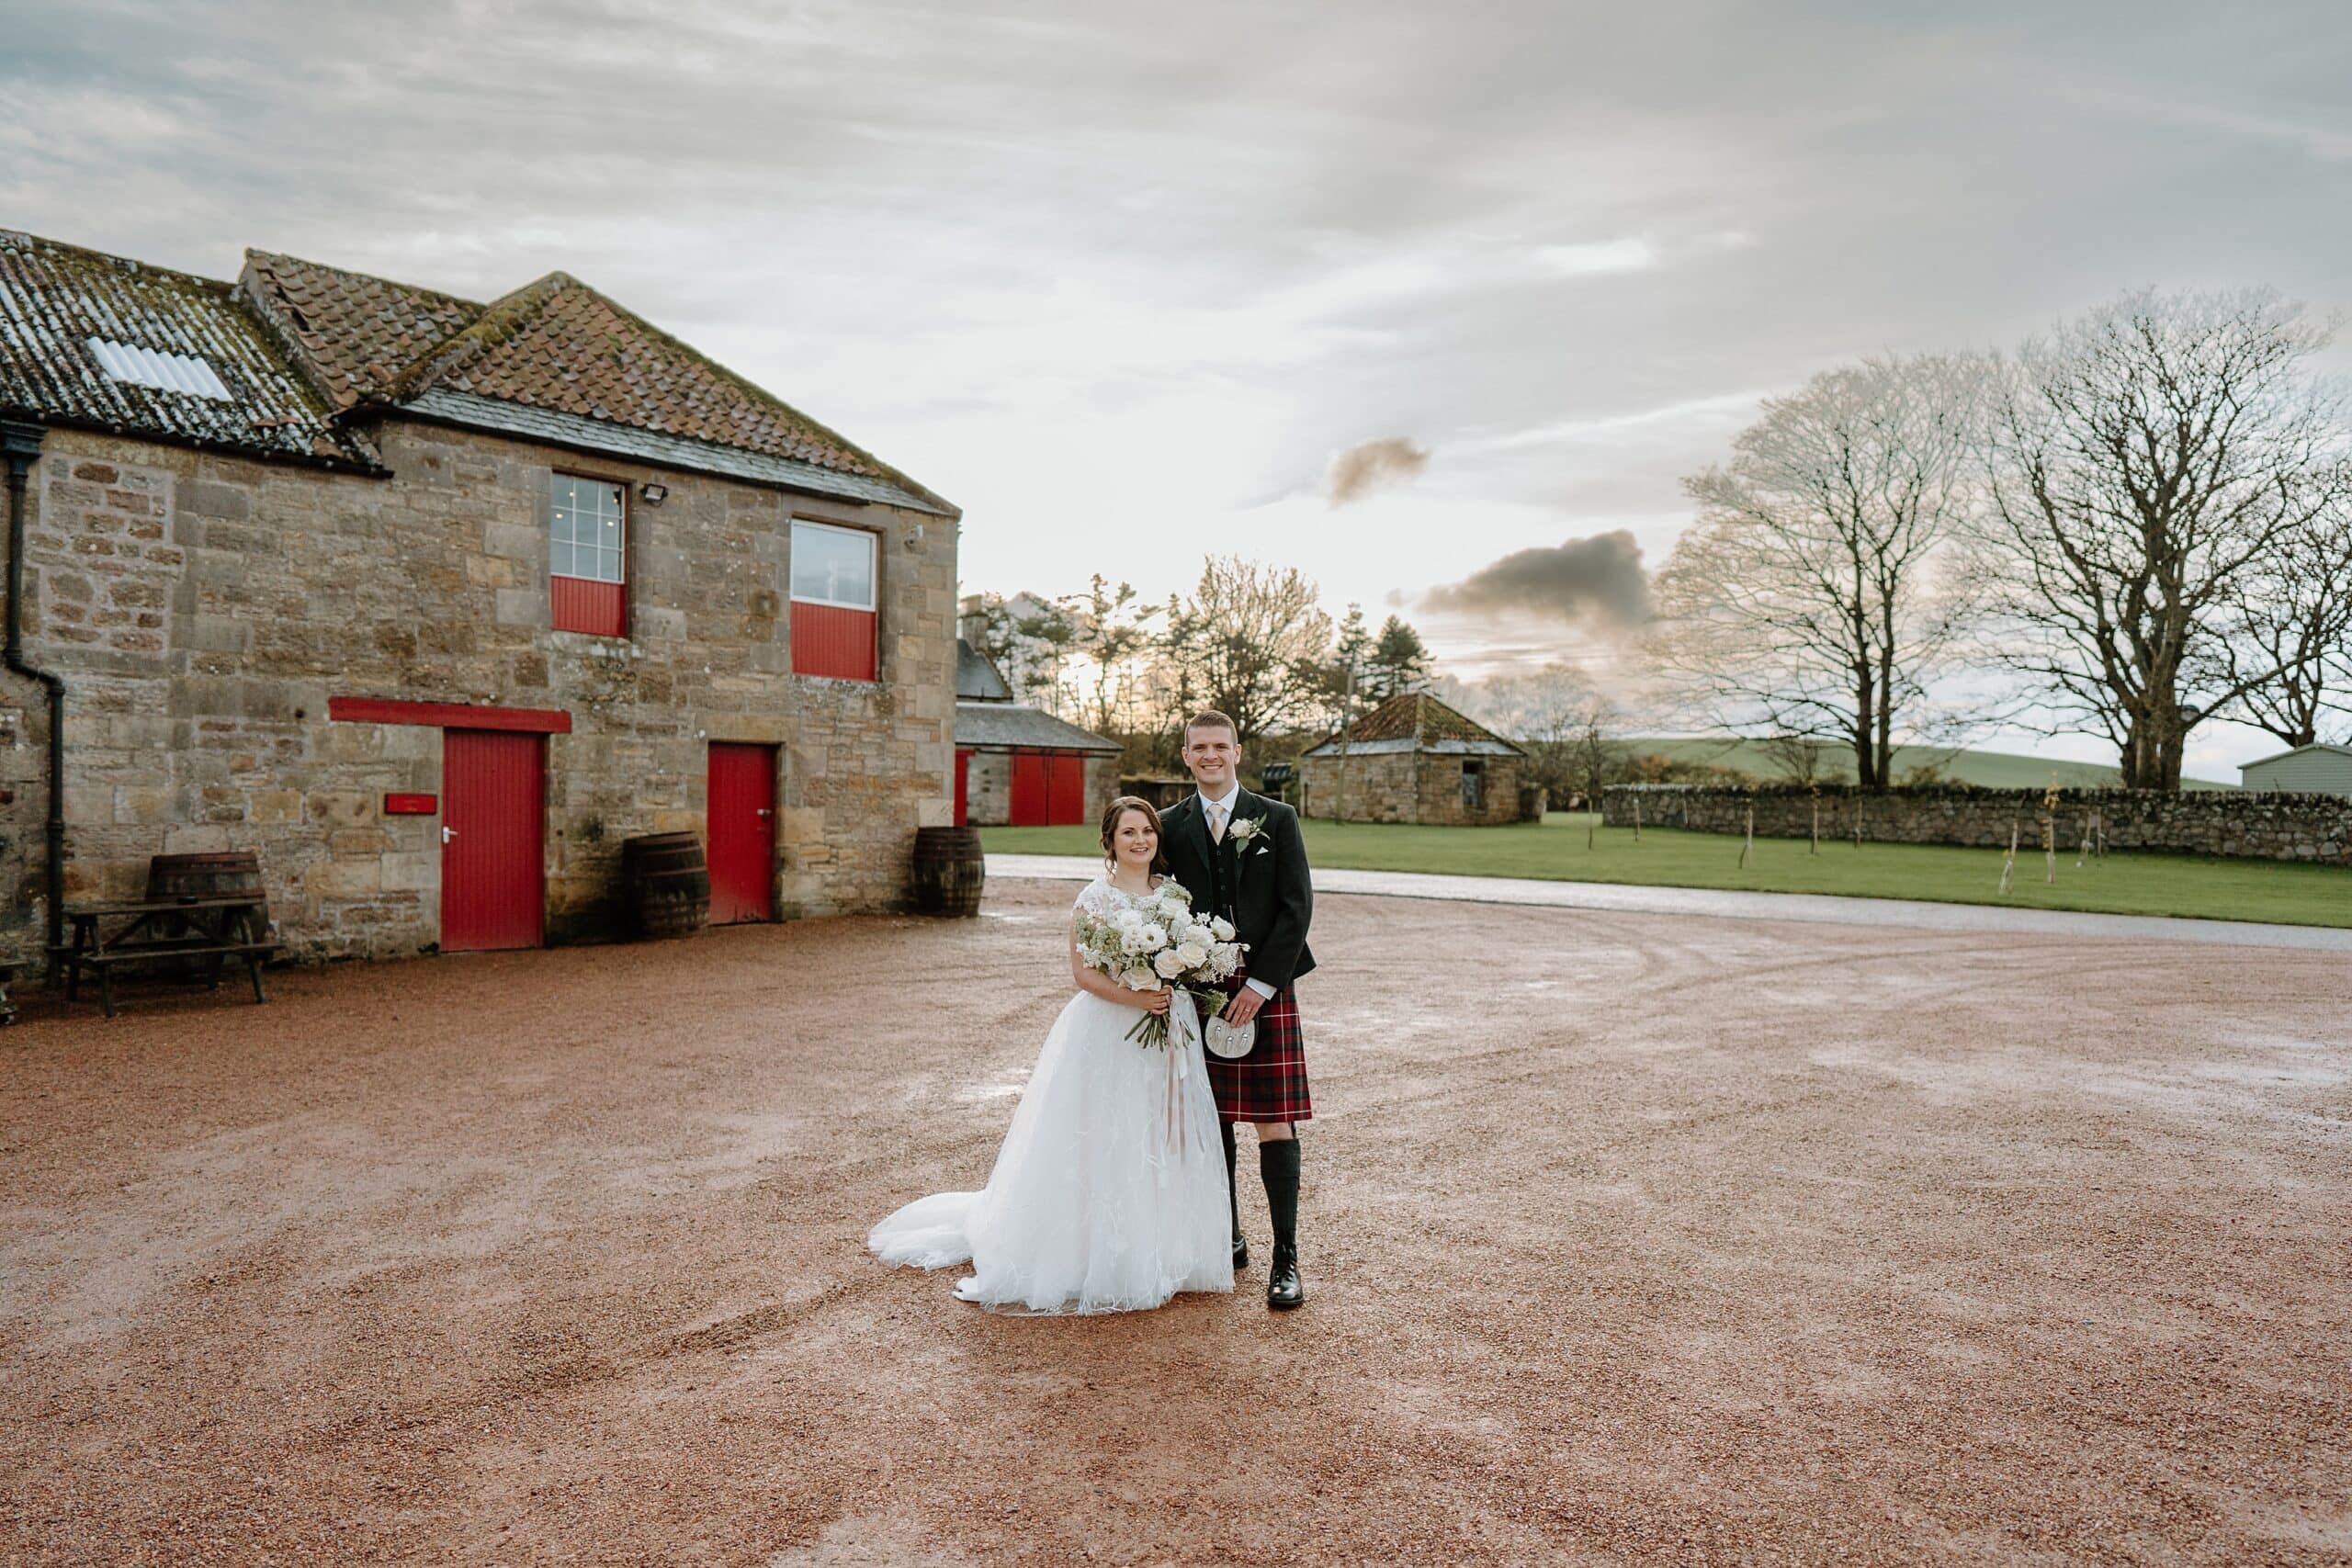 kinkell byre wedding photos of bride and groom outside venue with barn wedding venue st andrews in the background